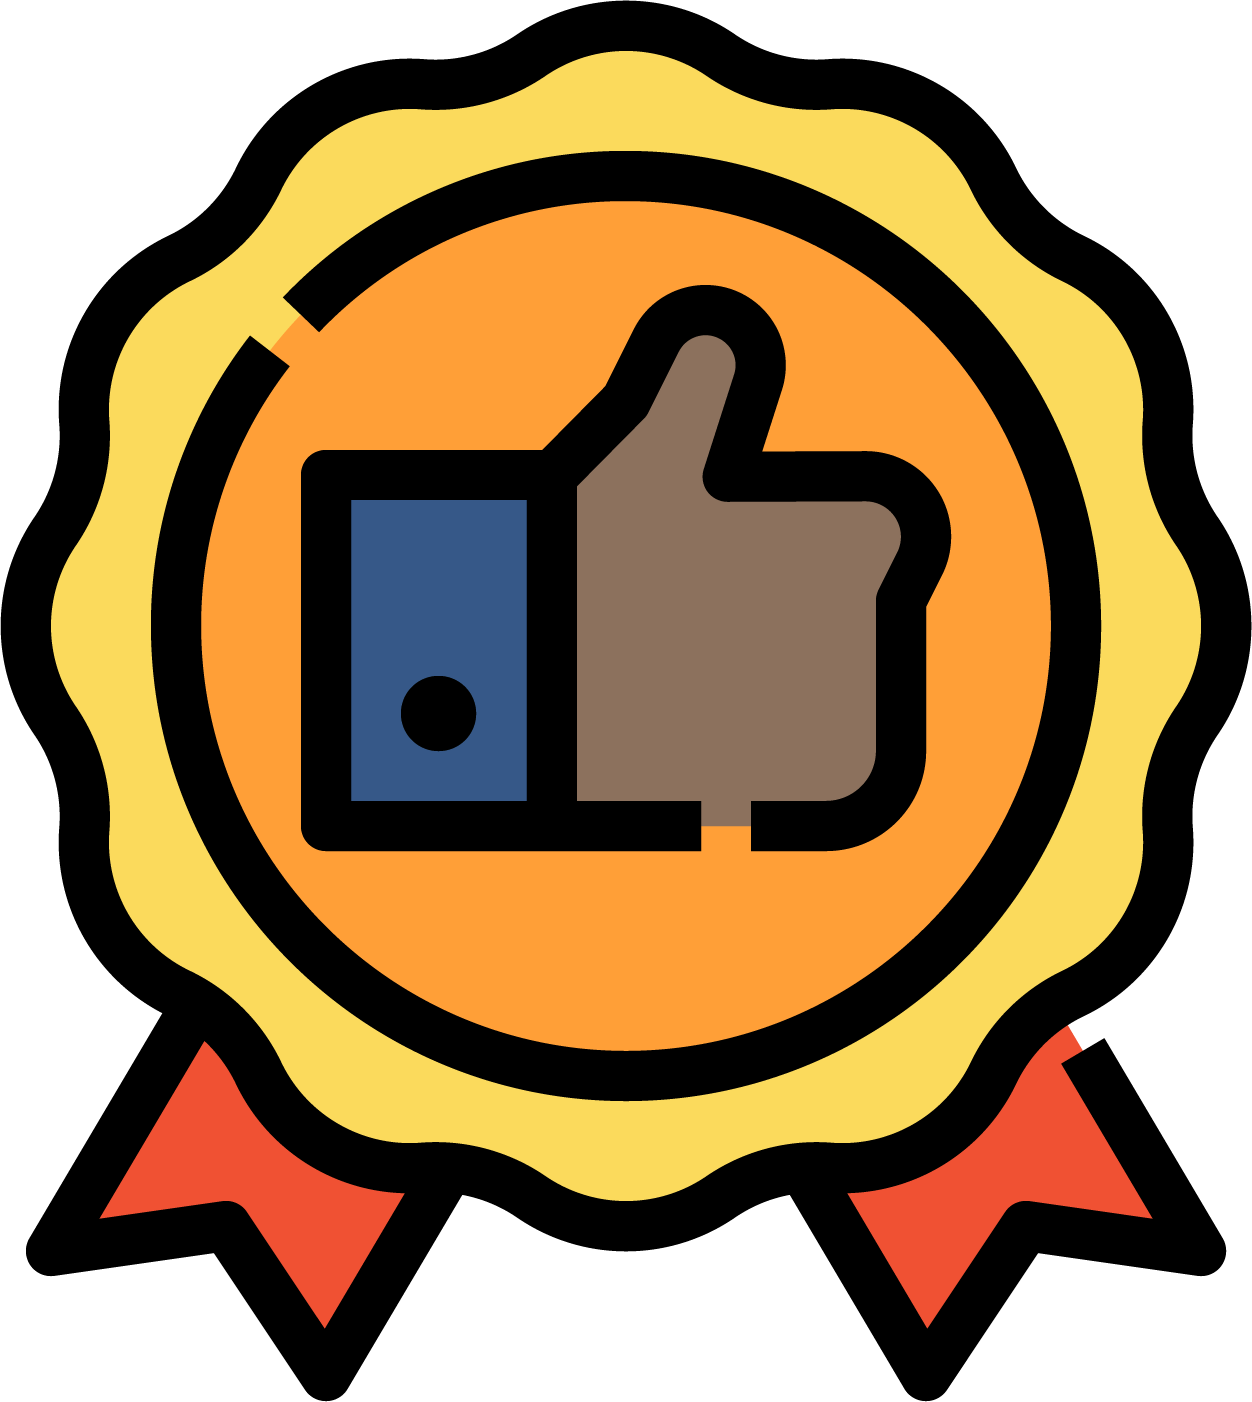 icon of medal with a thumbs up emoji in it